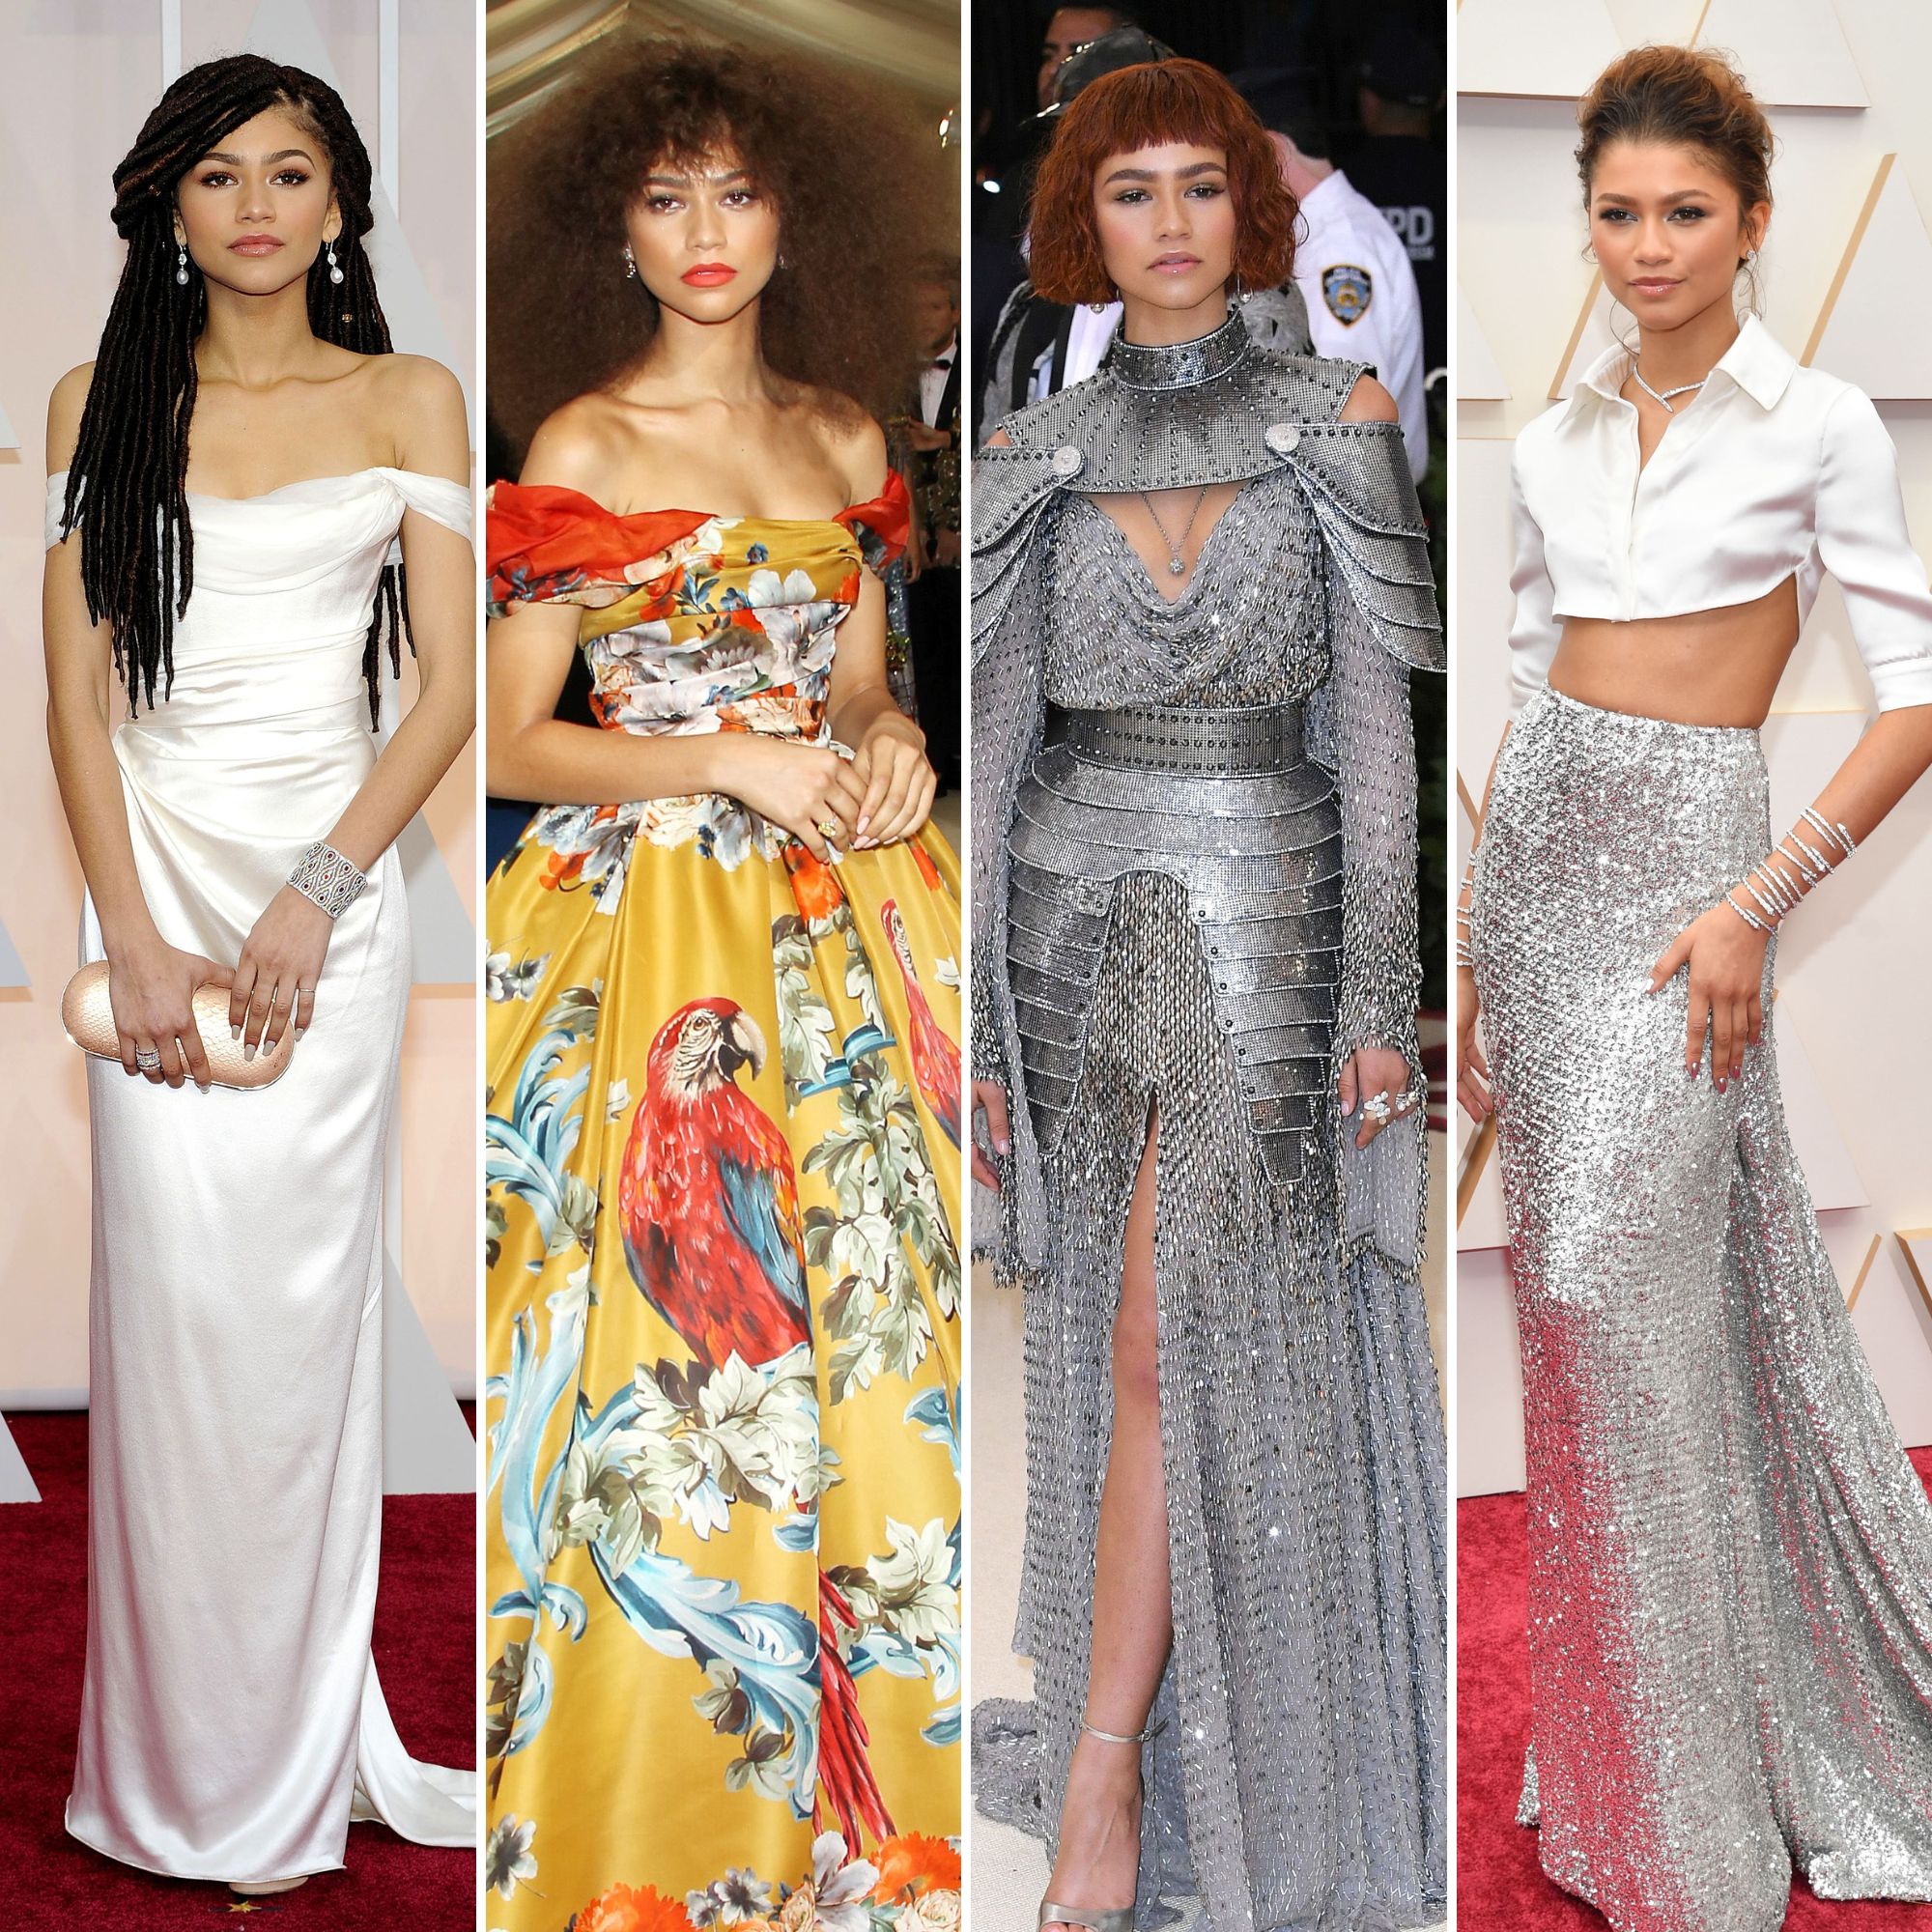 Zendaya's Best Red Carpet Moments and Style Evolution